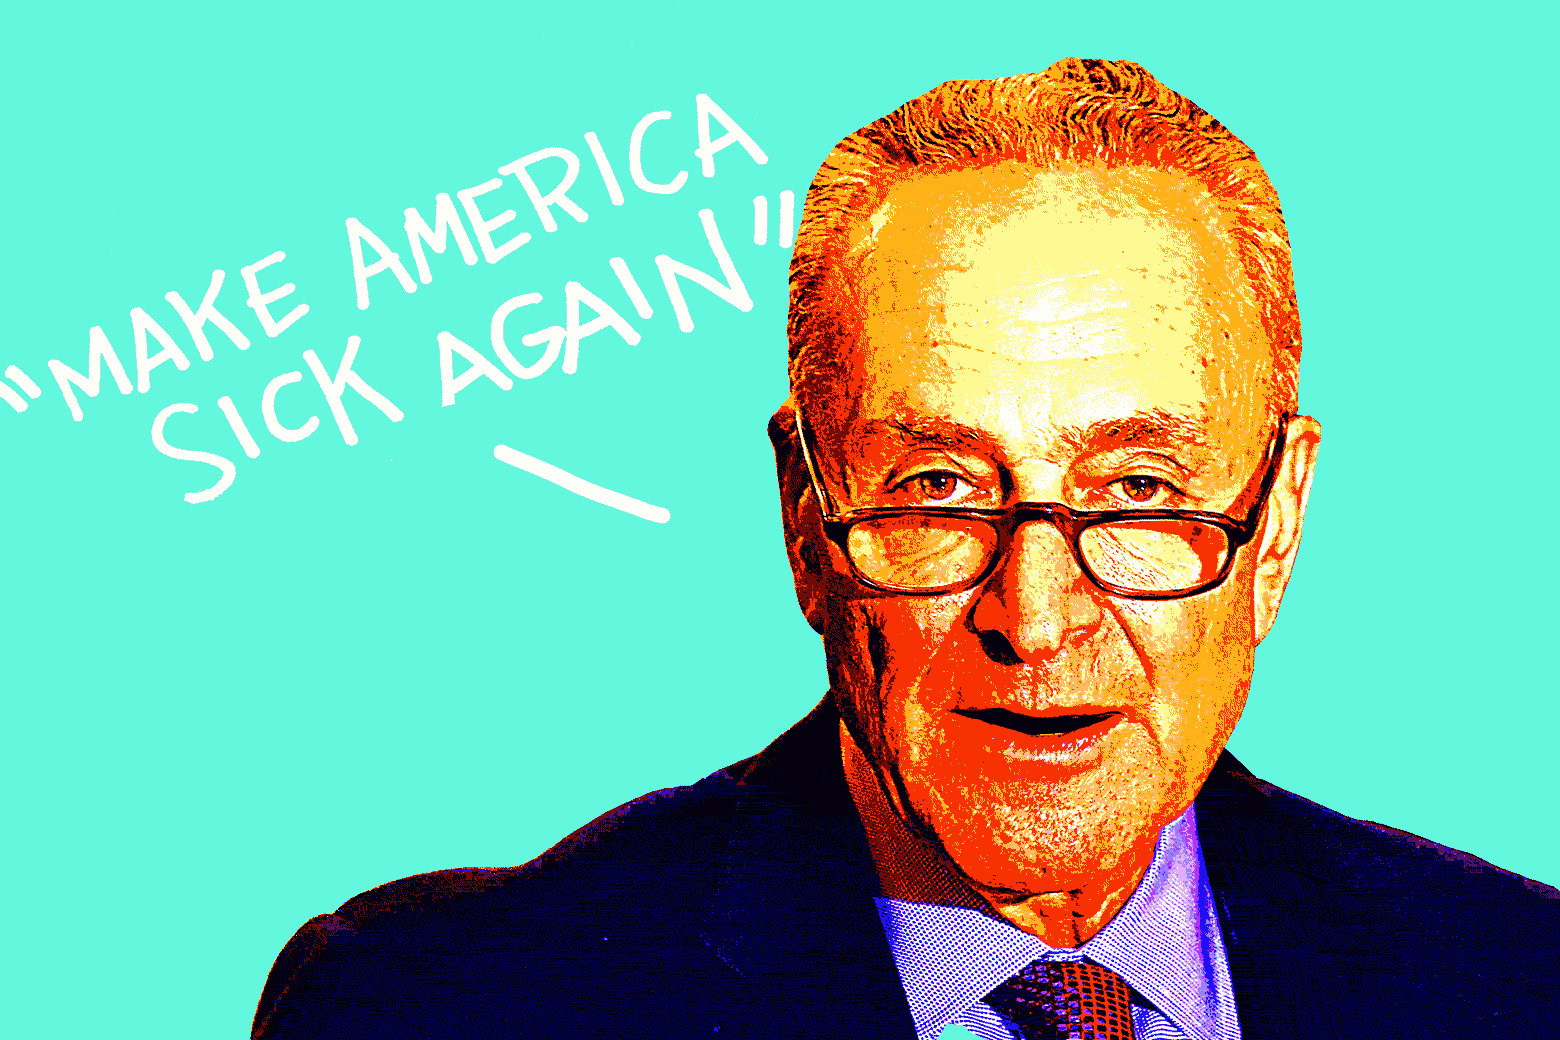 Chuck Schumer animation with the phrase, "Make America sick again."